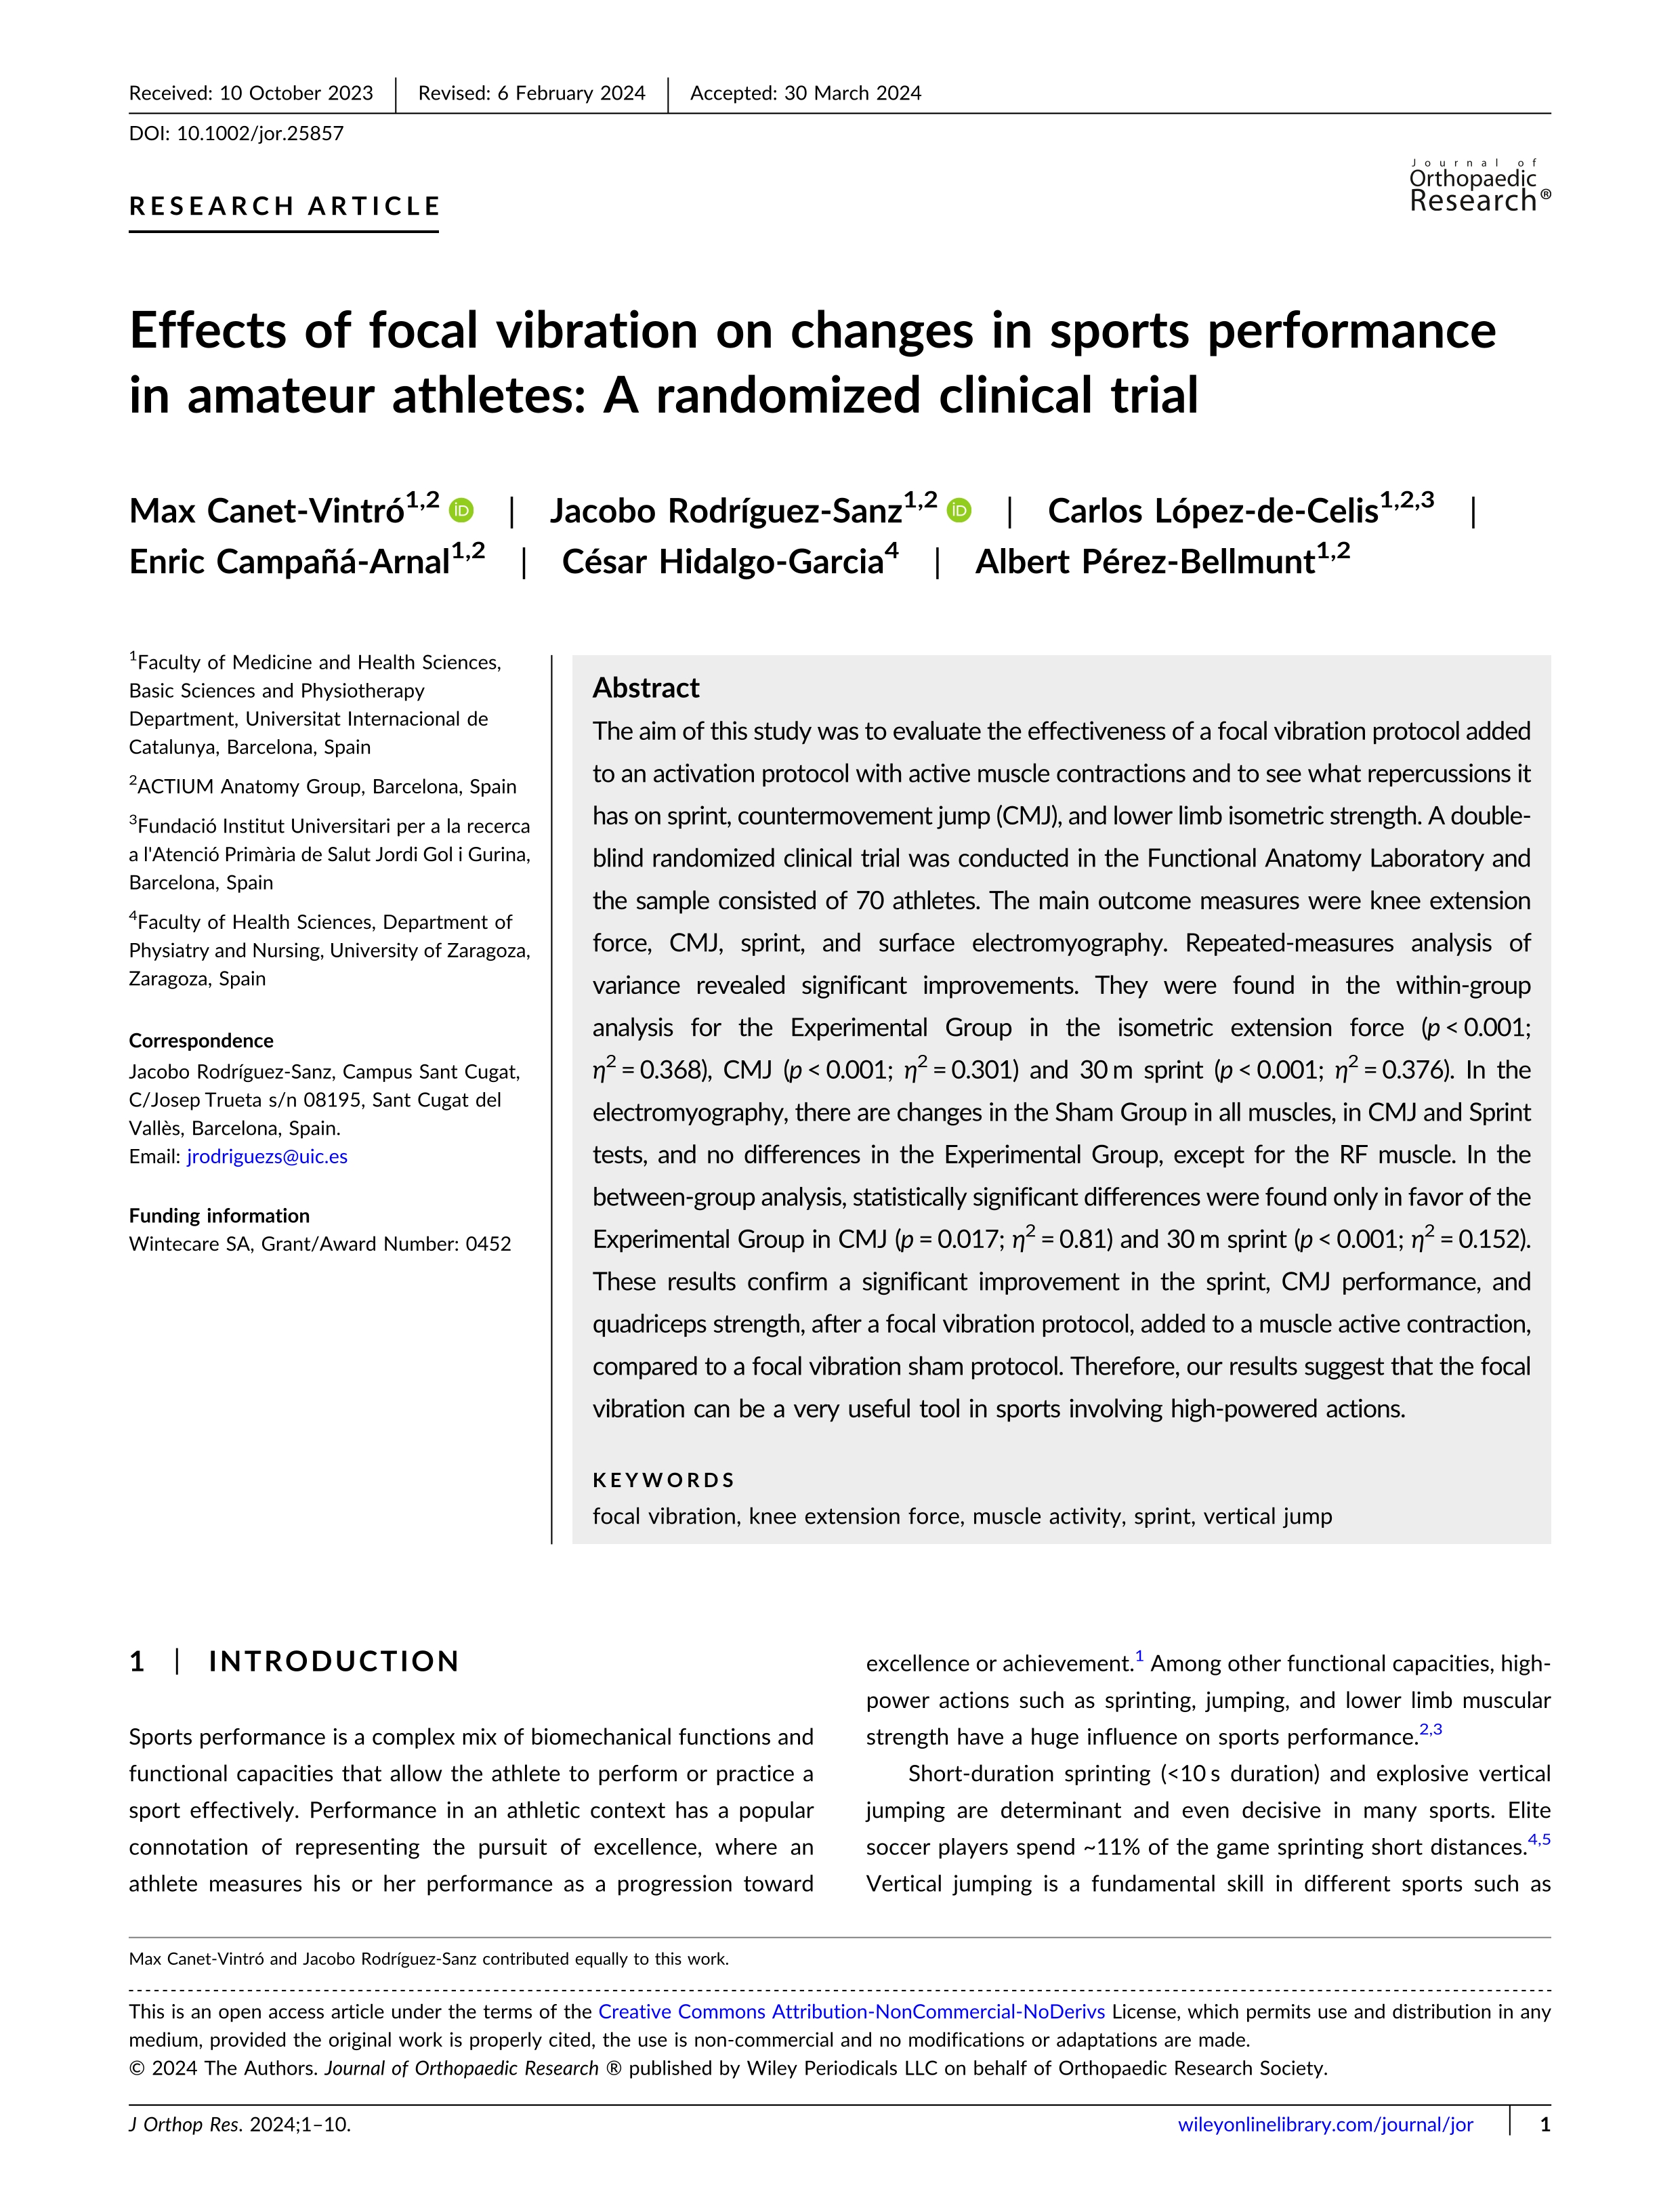 Effects of focal vibration on changes in sports performance in amateur athletes: a randomized clinical trial